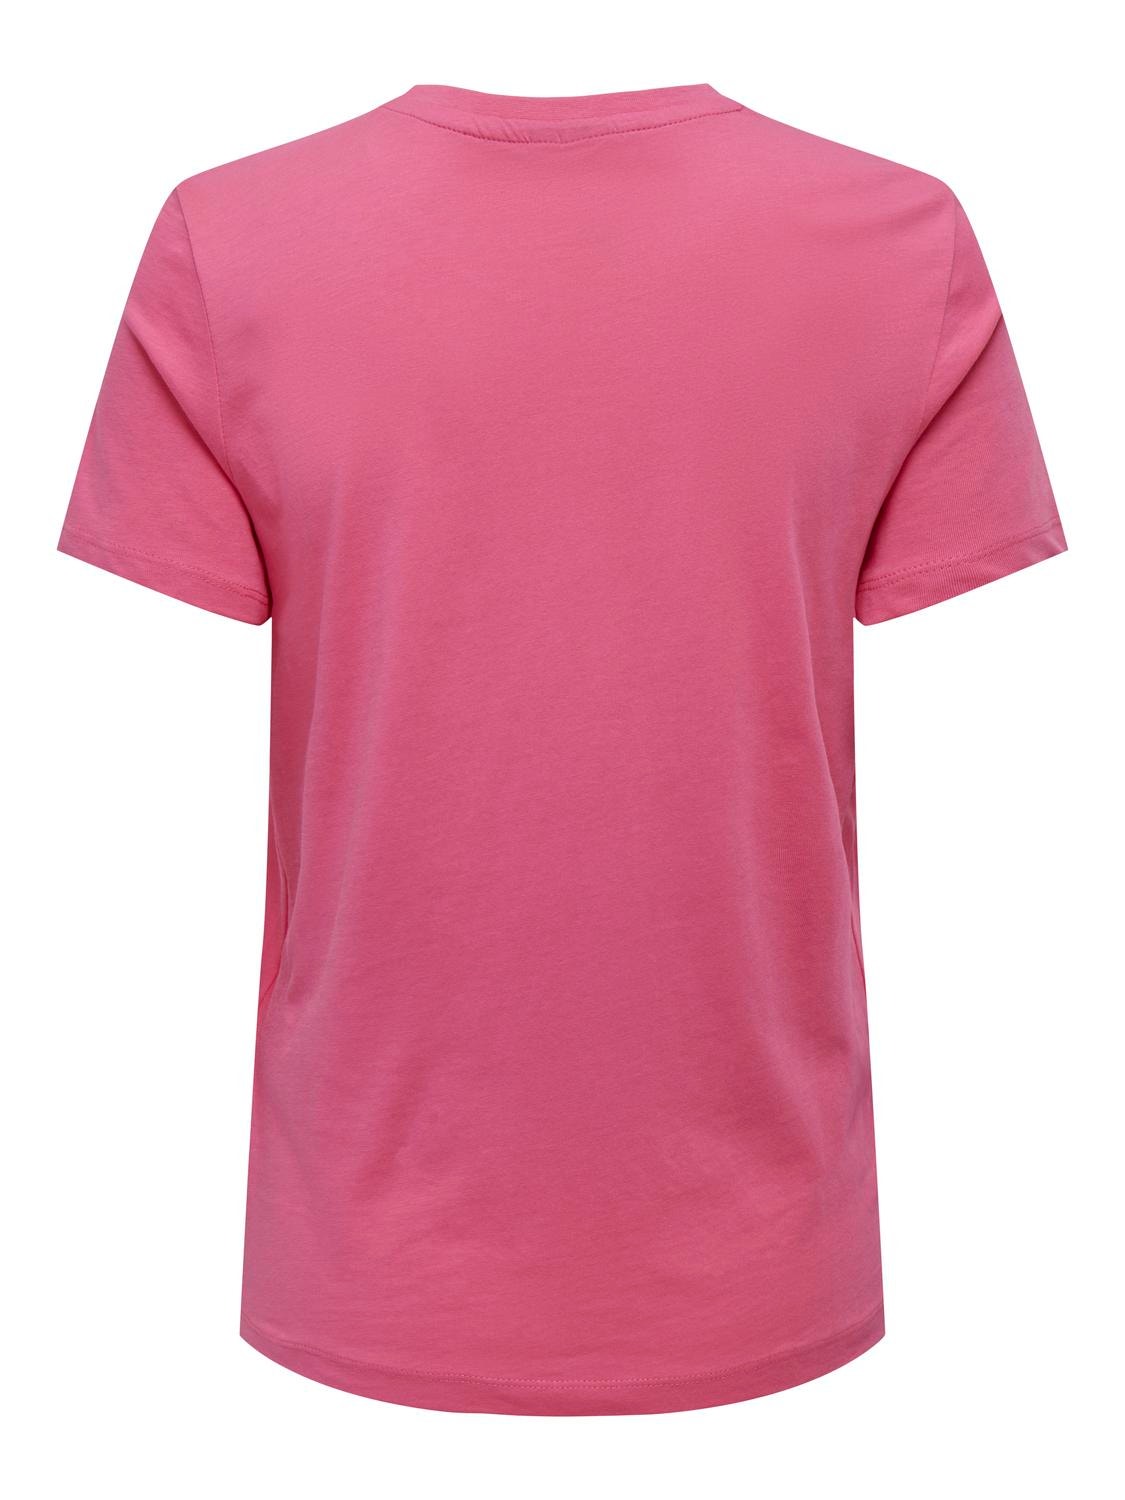 ONLY Regular Fit Round Neck Maternity T-Shirt -Camellia Rose - 15304024